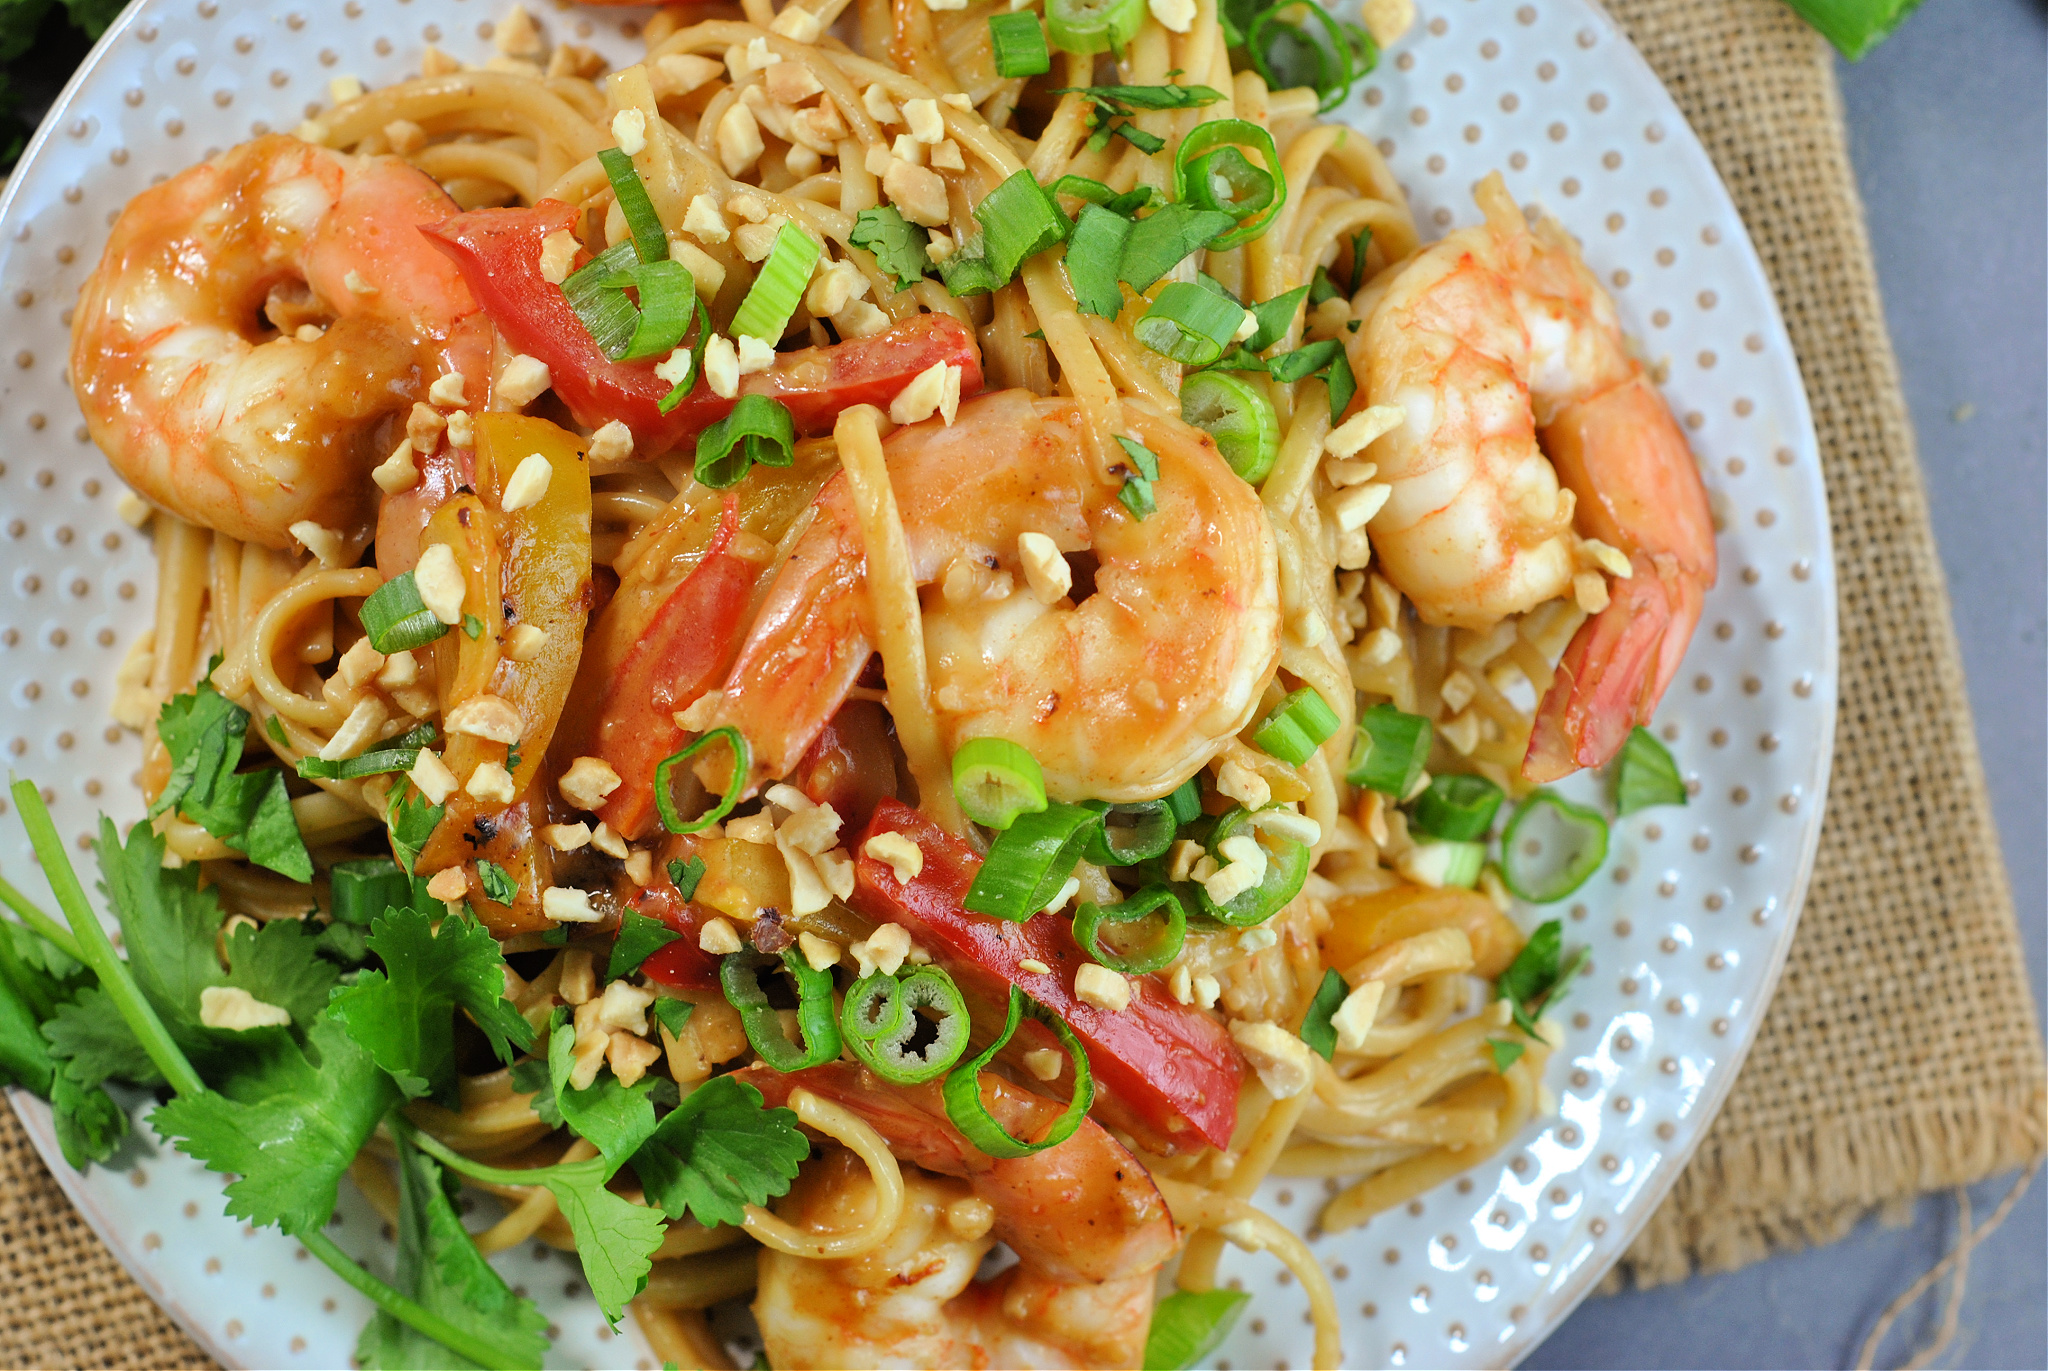 30-Minute Spicy Peanut Butter Noodles with Shrimp